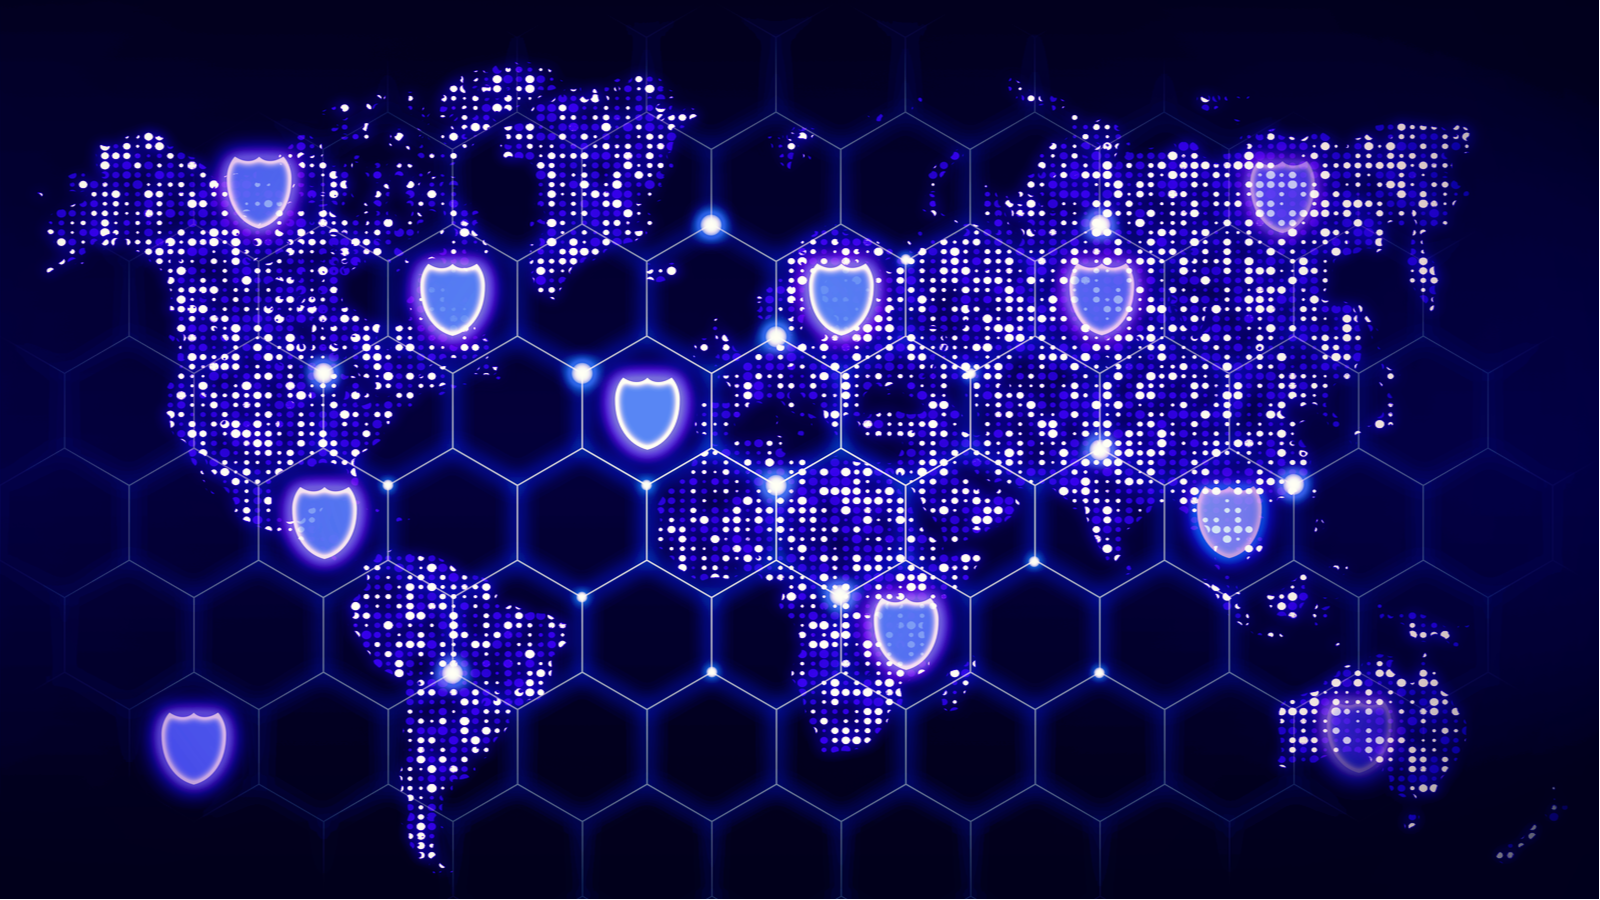 ARQQ Stock. An image of a hexagon network covering the world map with glowing data centers and shield symbols